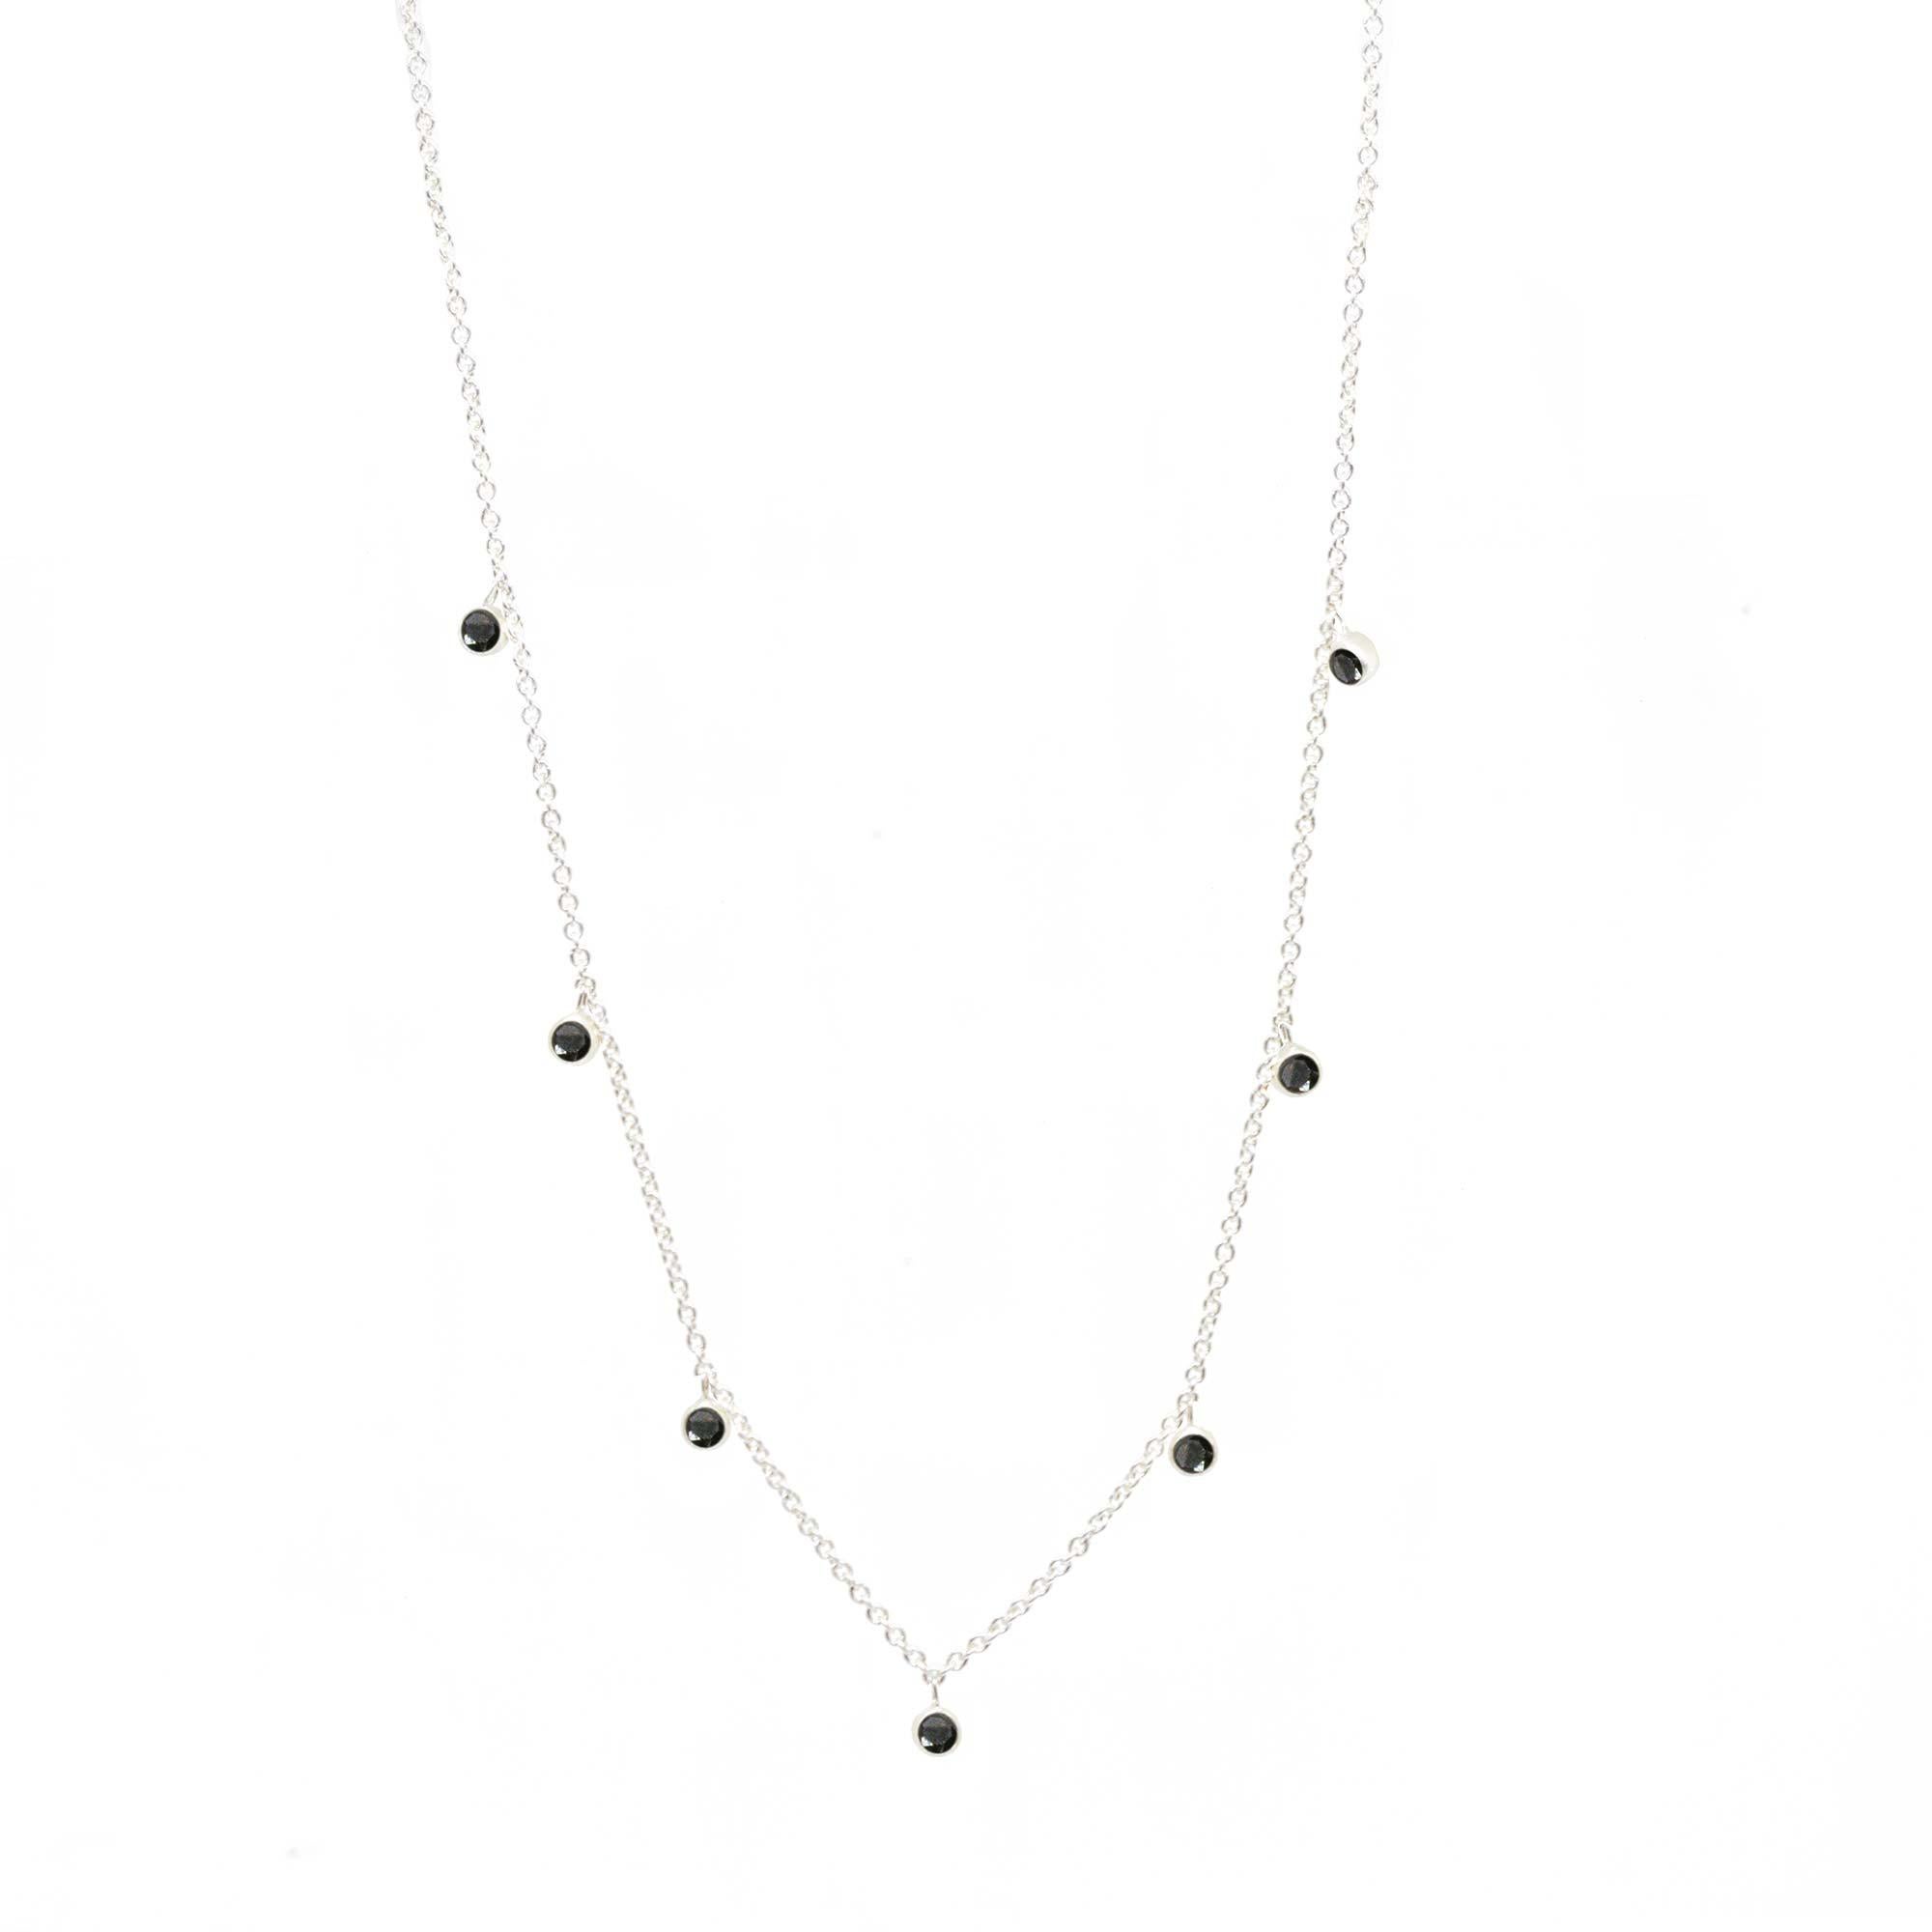 Made with black spinel gemstone rimmed in sterling silver, our Forged Silver Necklace provides an effortless, yet fashionable style. 

Metal: Sterling Silver
Stone carat: 0.75
Length: 15-17''
Stone size: 2.5mm

About the stones:
Genuine Black